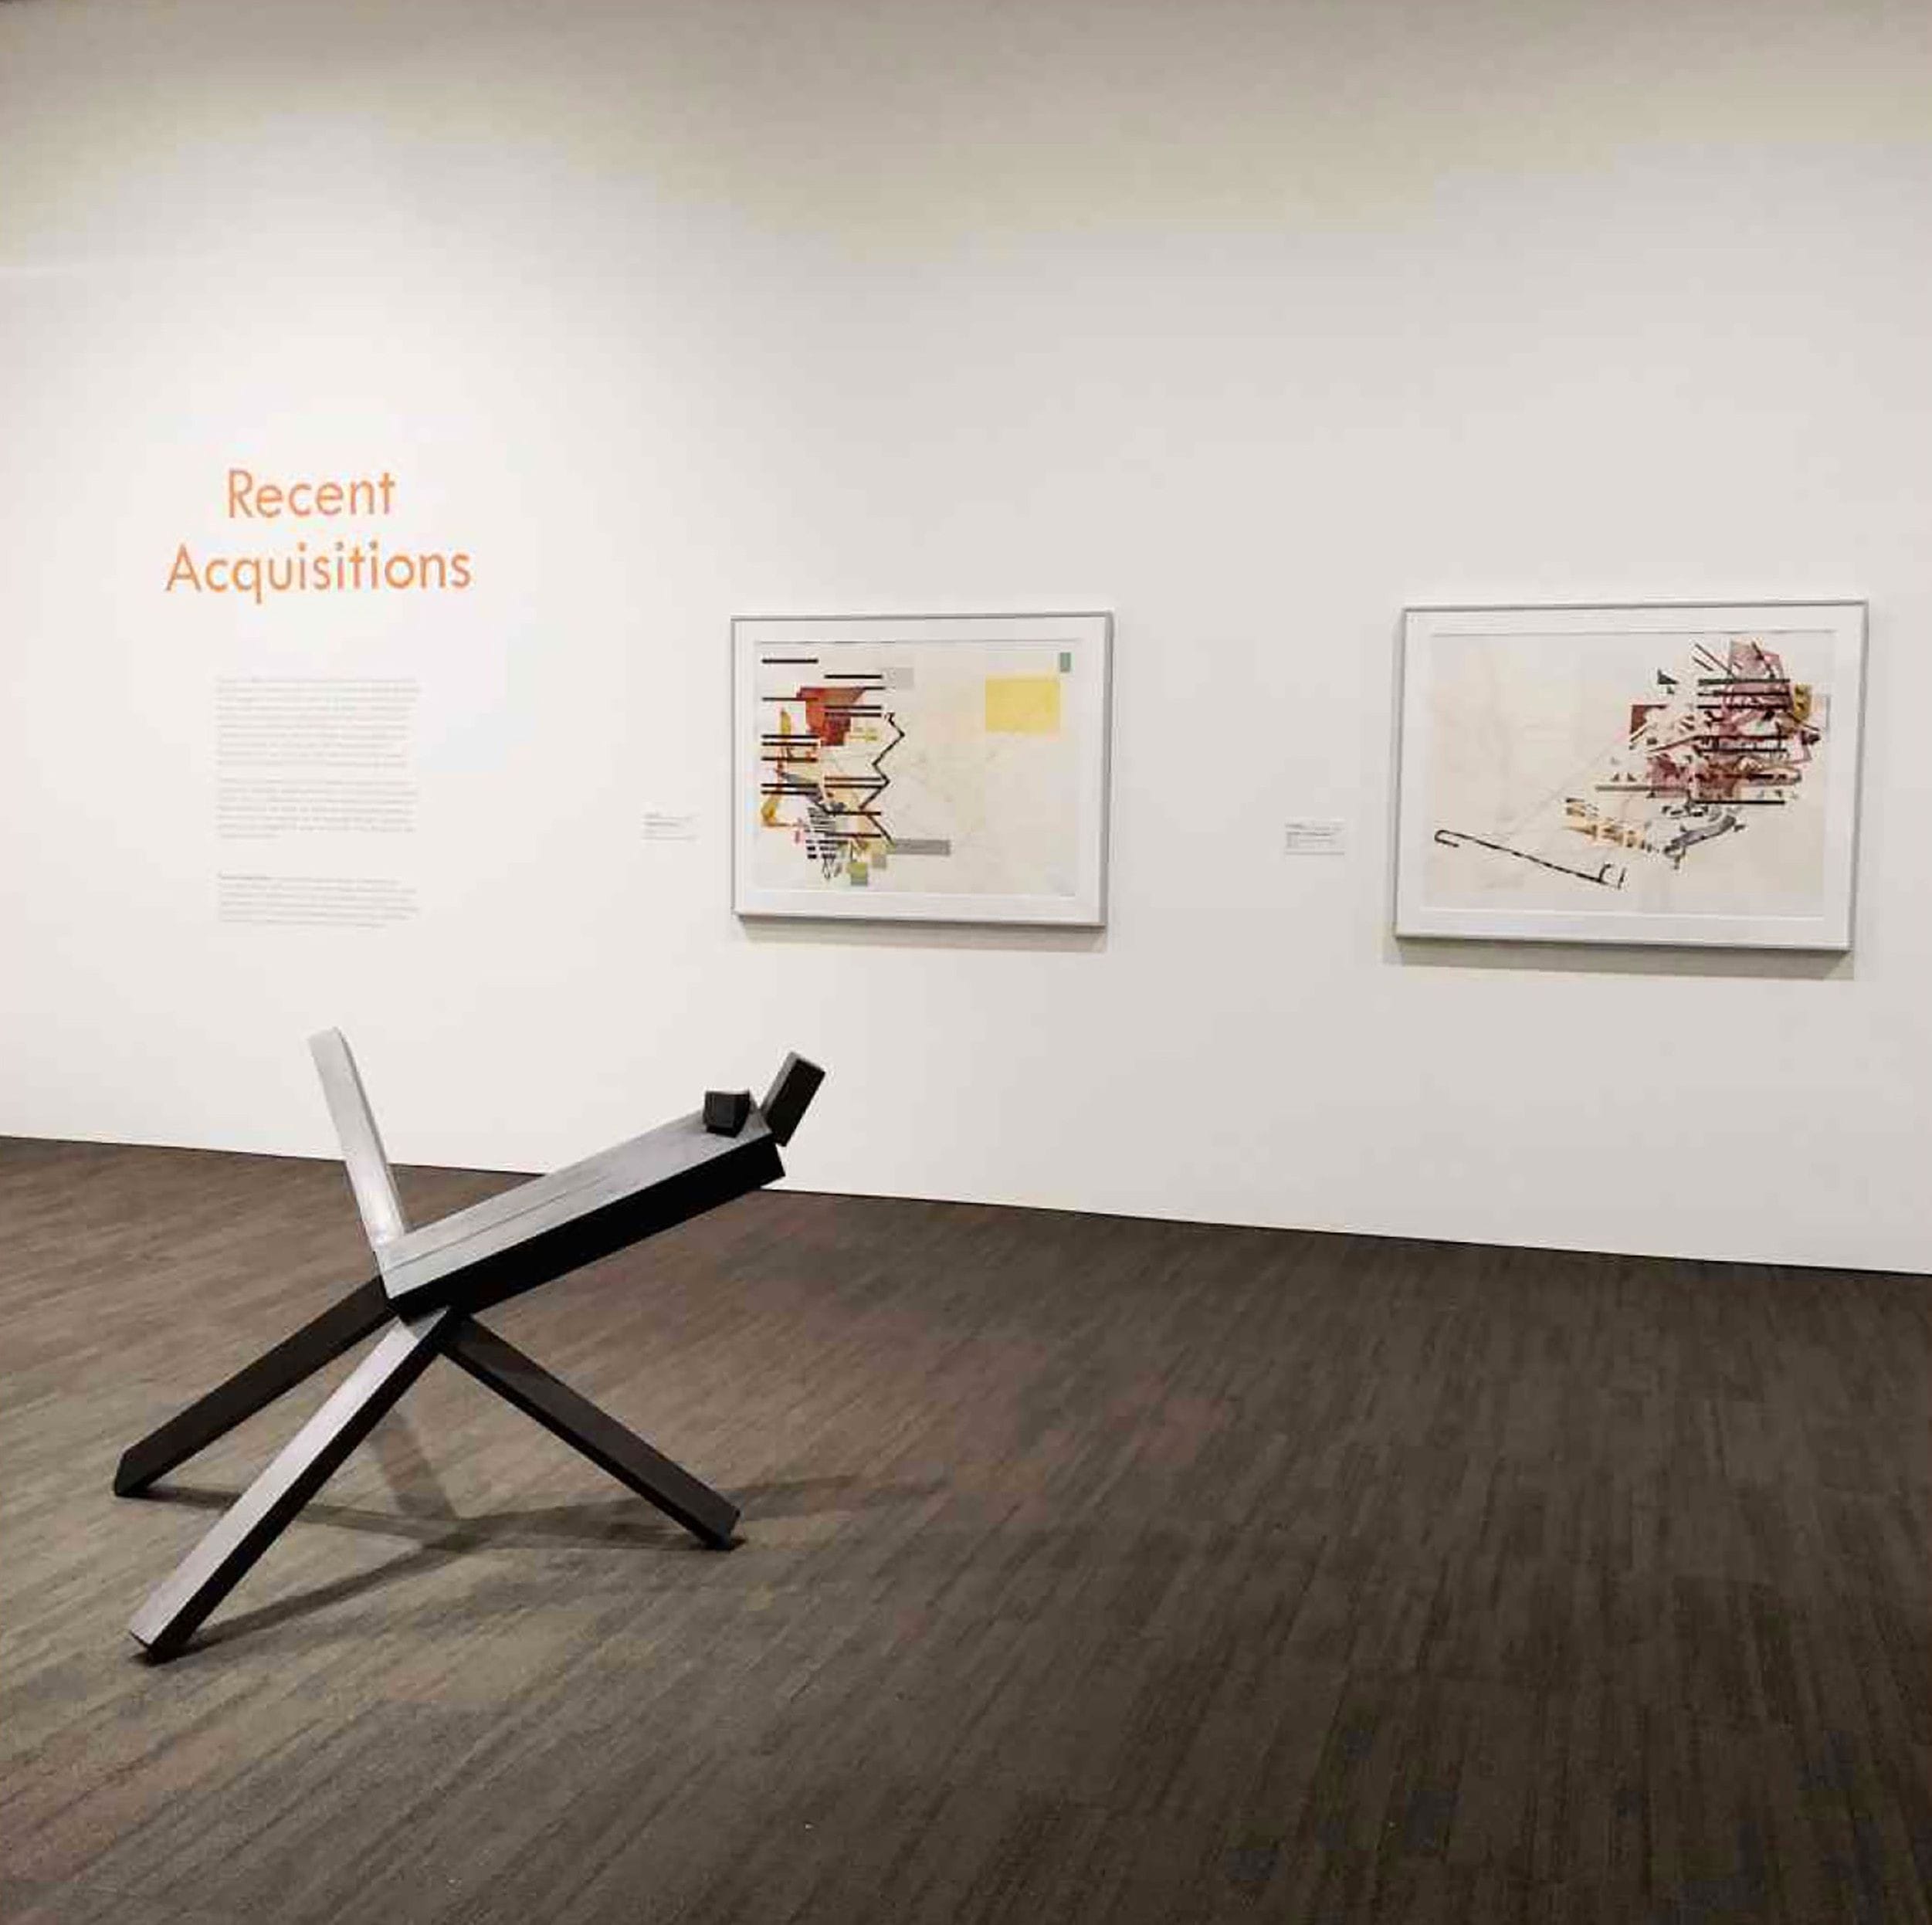 Recent Acquisitions
Neuberger Museum of Art
Purchase, NY; January 29 to May 17, 2020